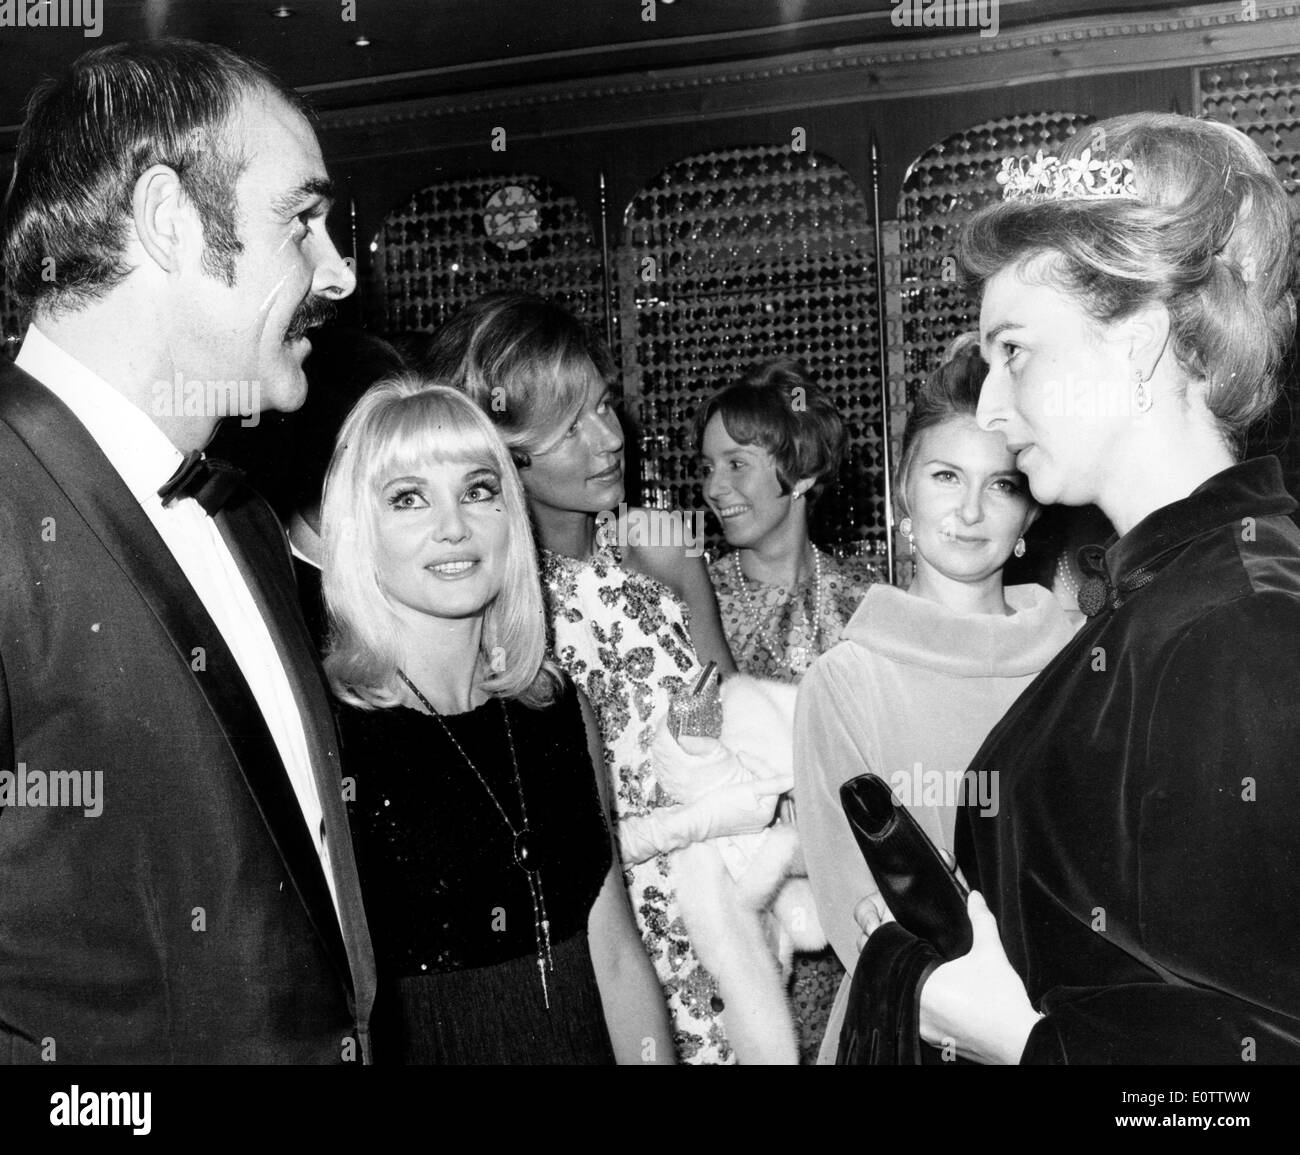 Actor Sean Connery at a party with wife Diane Cilento Stock Photo